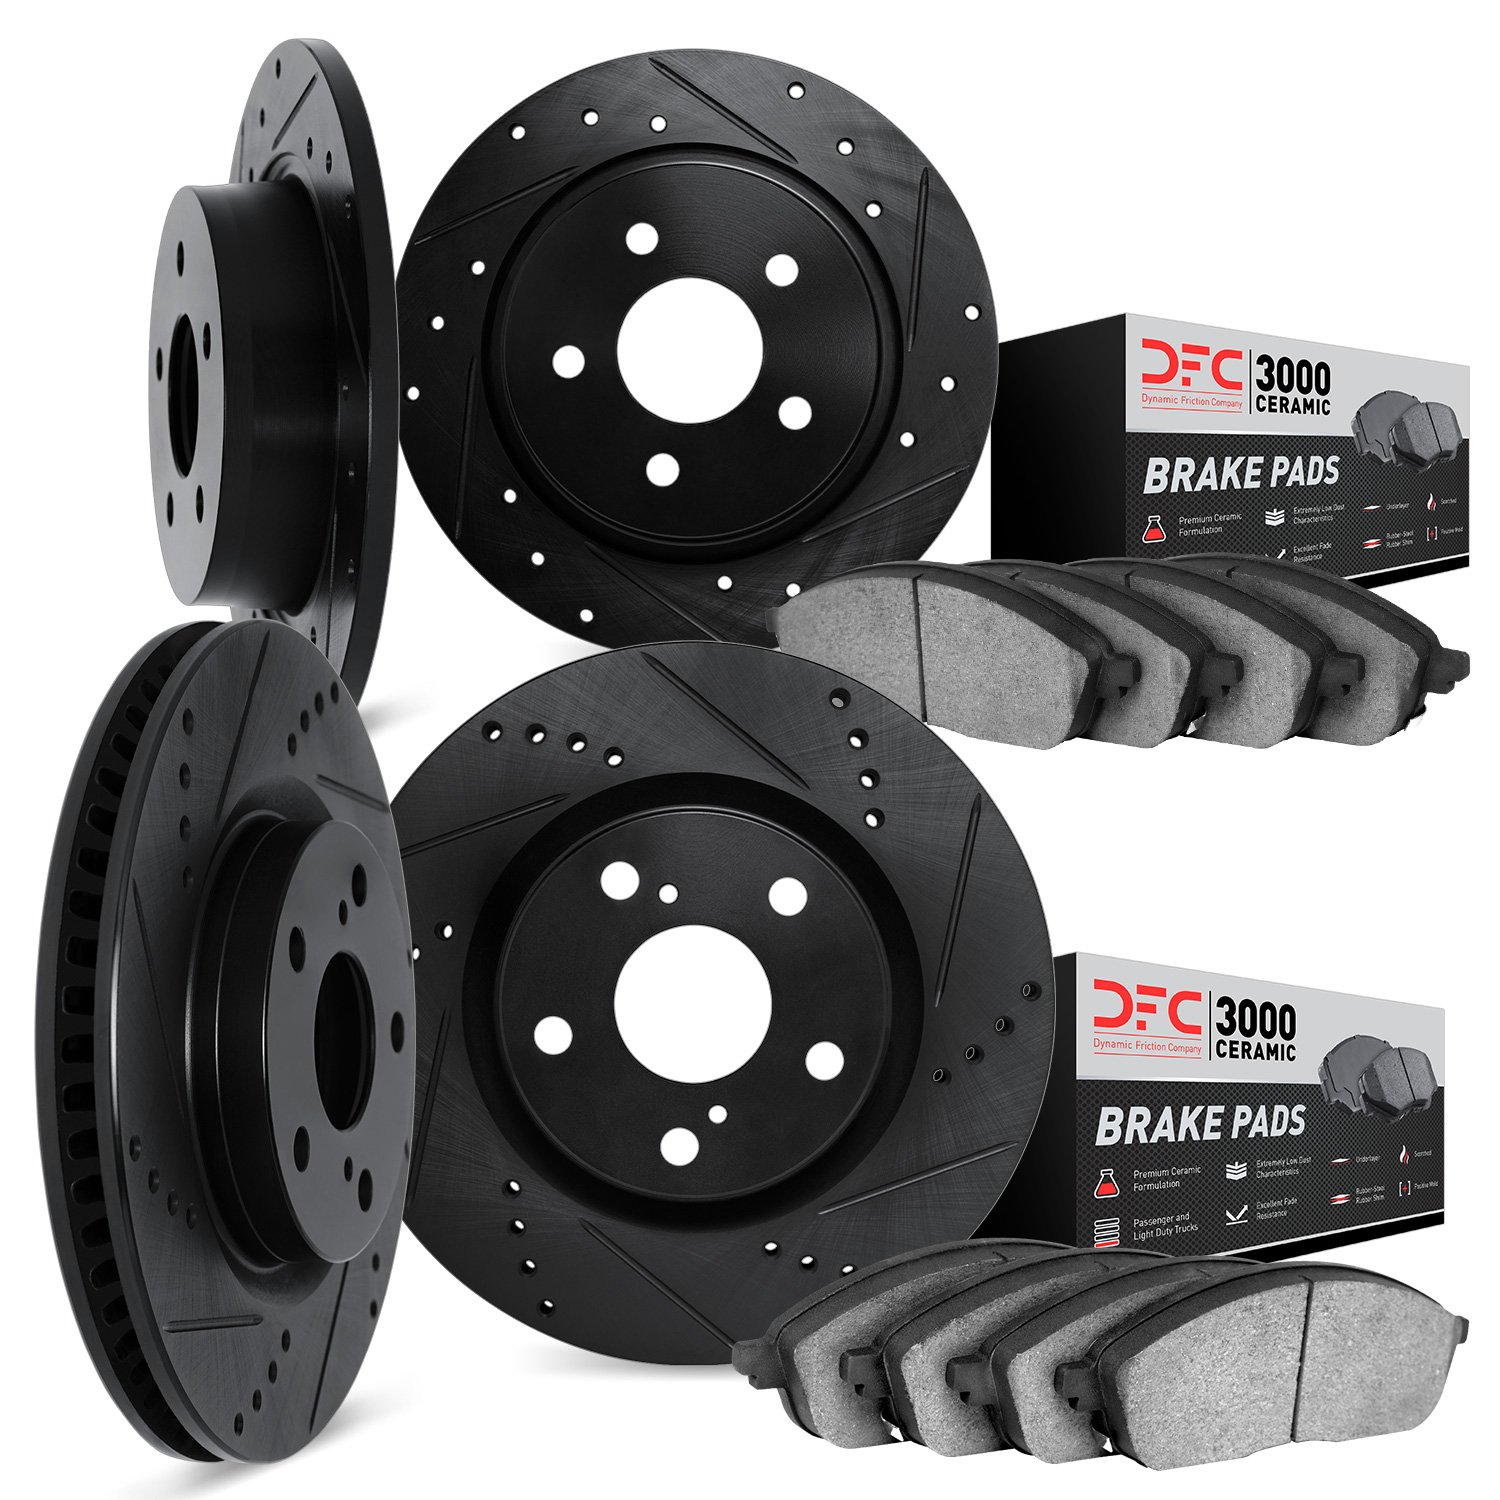 8304-31009 Drilled/Slotted Brake Rotors with 3000-Series Ceramic Brake Pads Kit [Black], 1982-1988 BMW, Position: Front and Rear